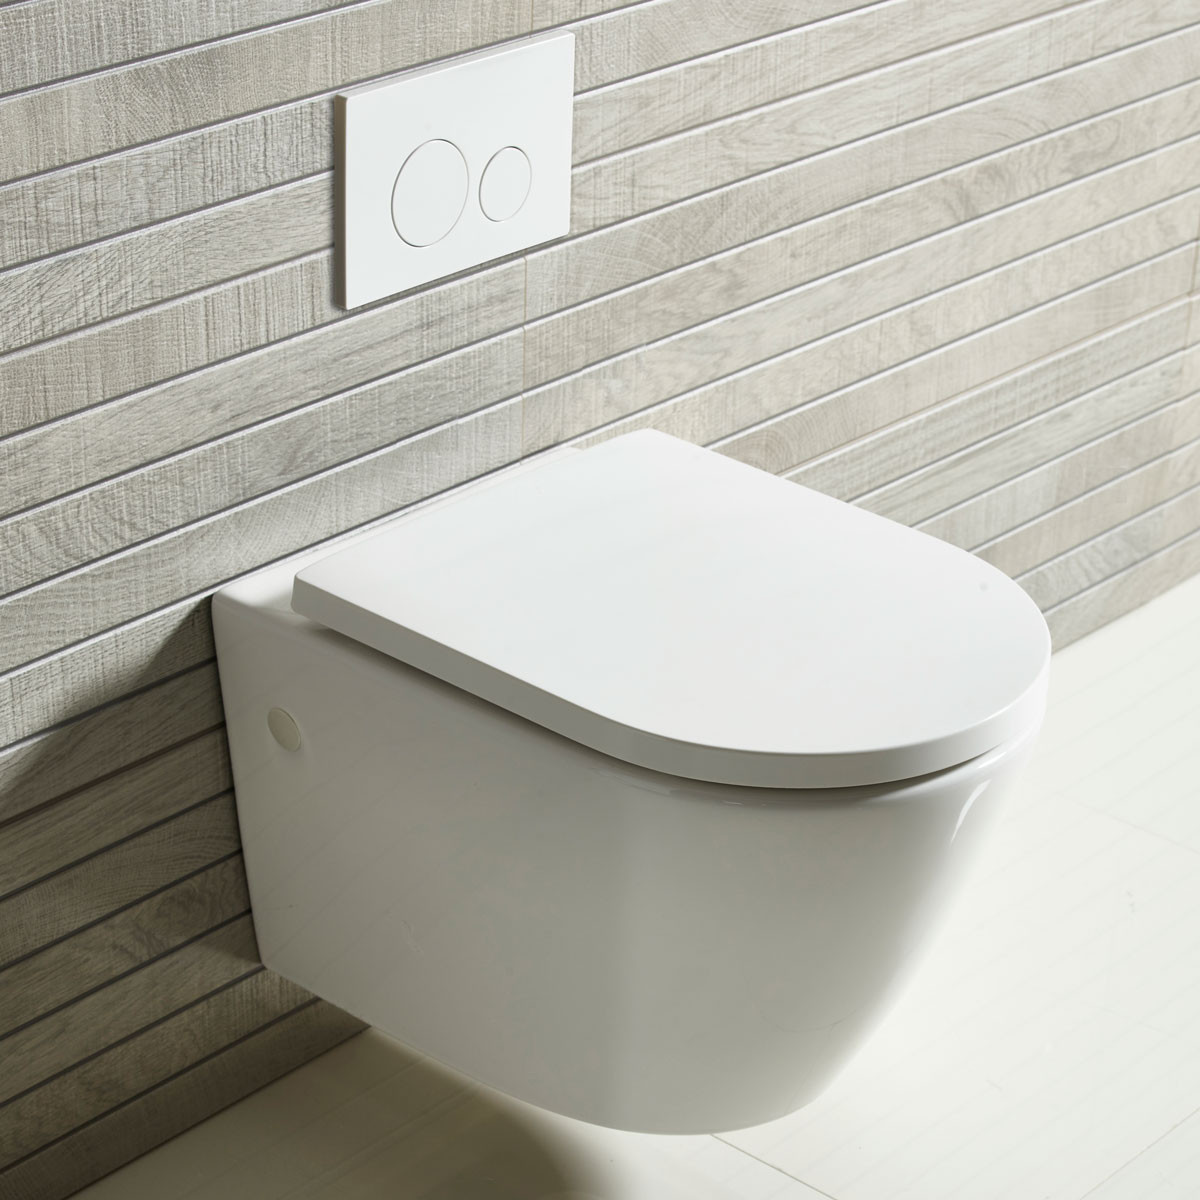 What Kind of Ceramic Sanitary Ware is of High Quality?